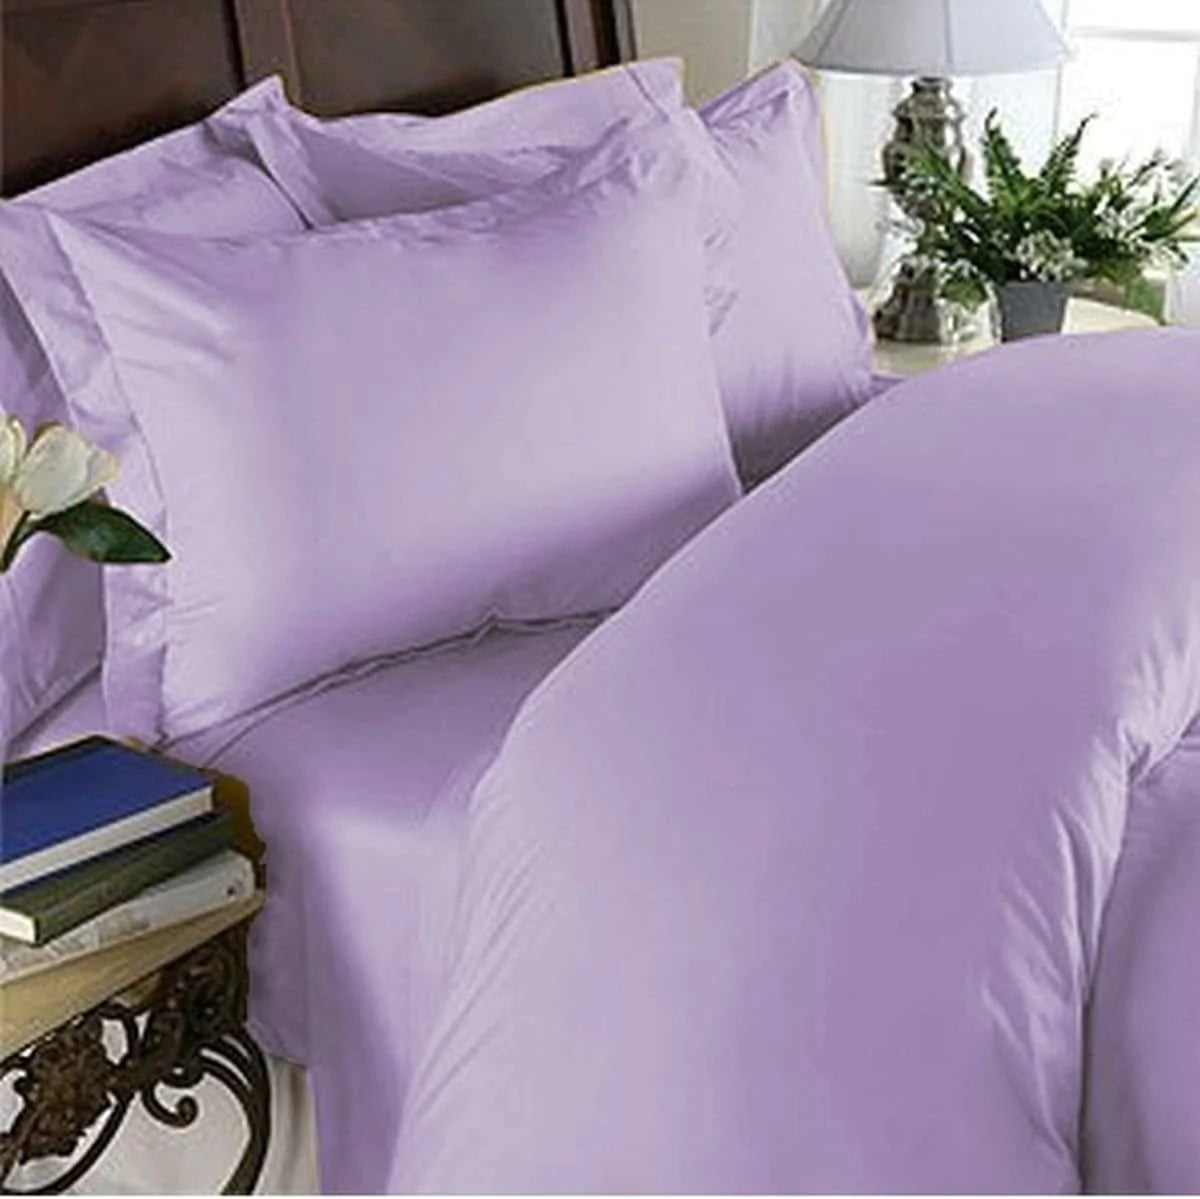 Buy 1000 Thread Count Egyptian Cotton Sheet Set Lavender Solid  at Egyptianhomelinens.com